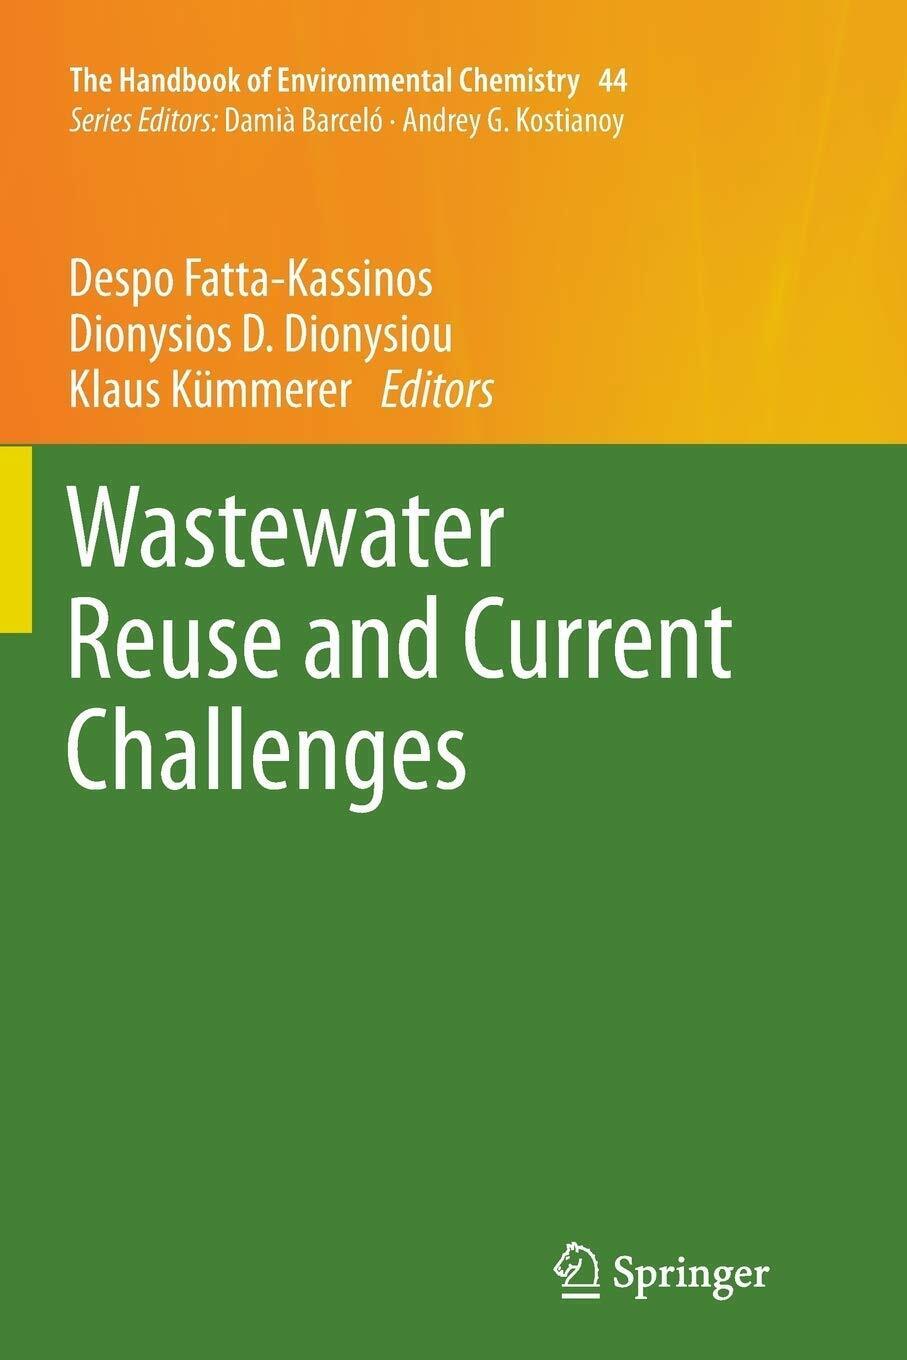 Wastewater Reuse and Current Challenges - Springer, 2018